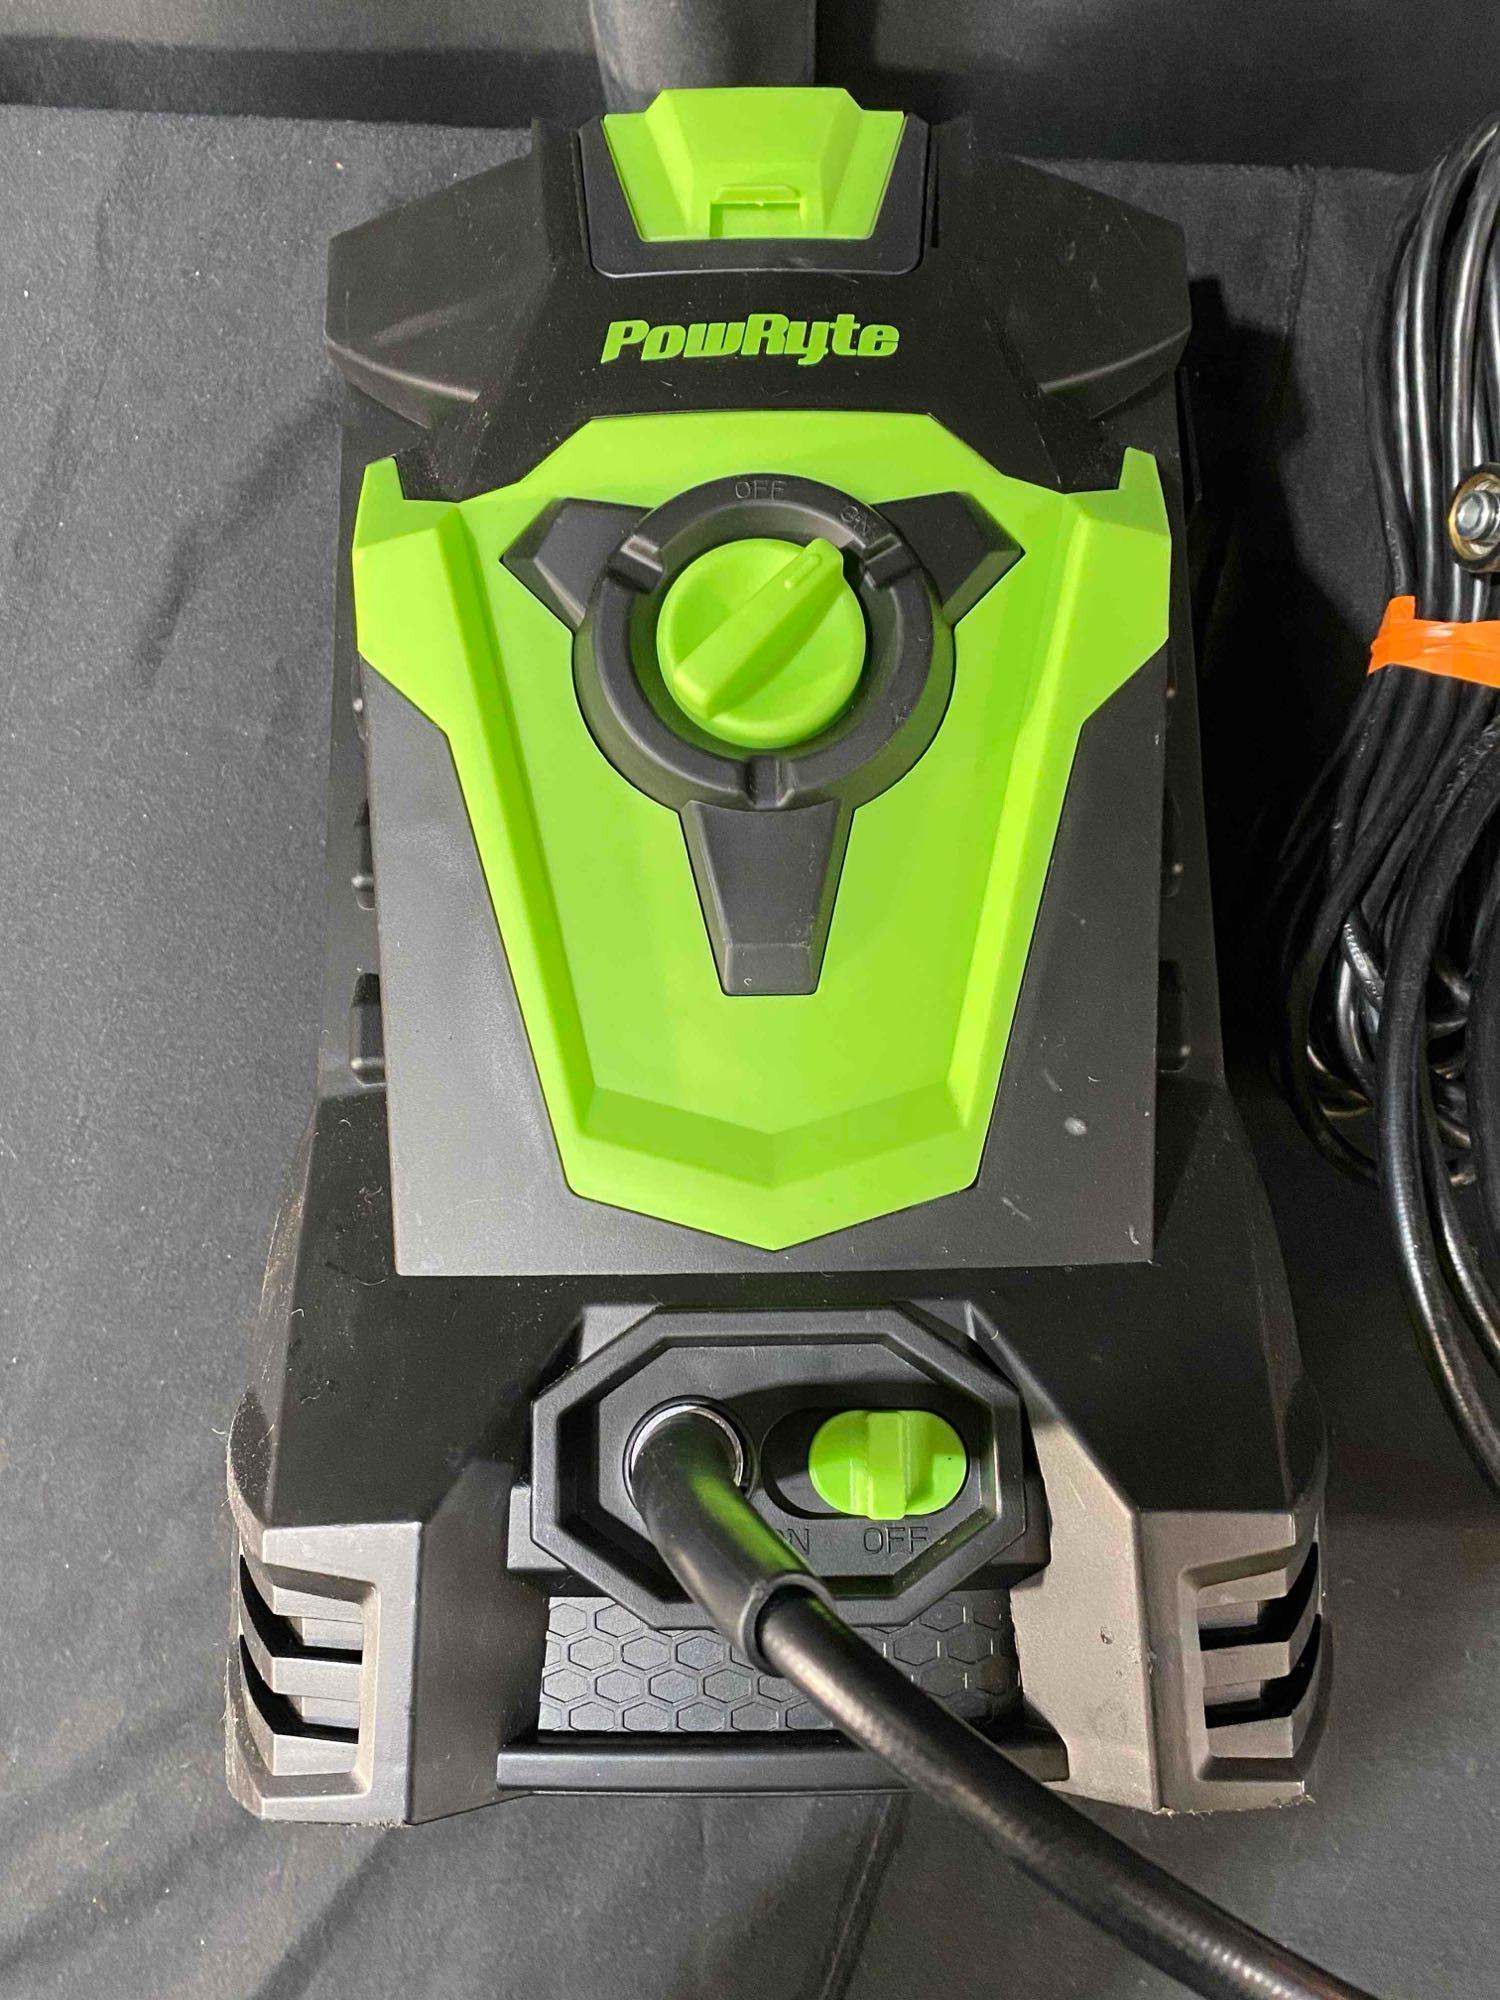 PowRyte Electric Pressure Washer